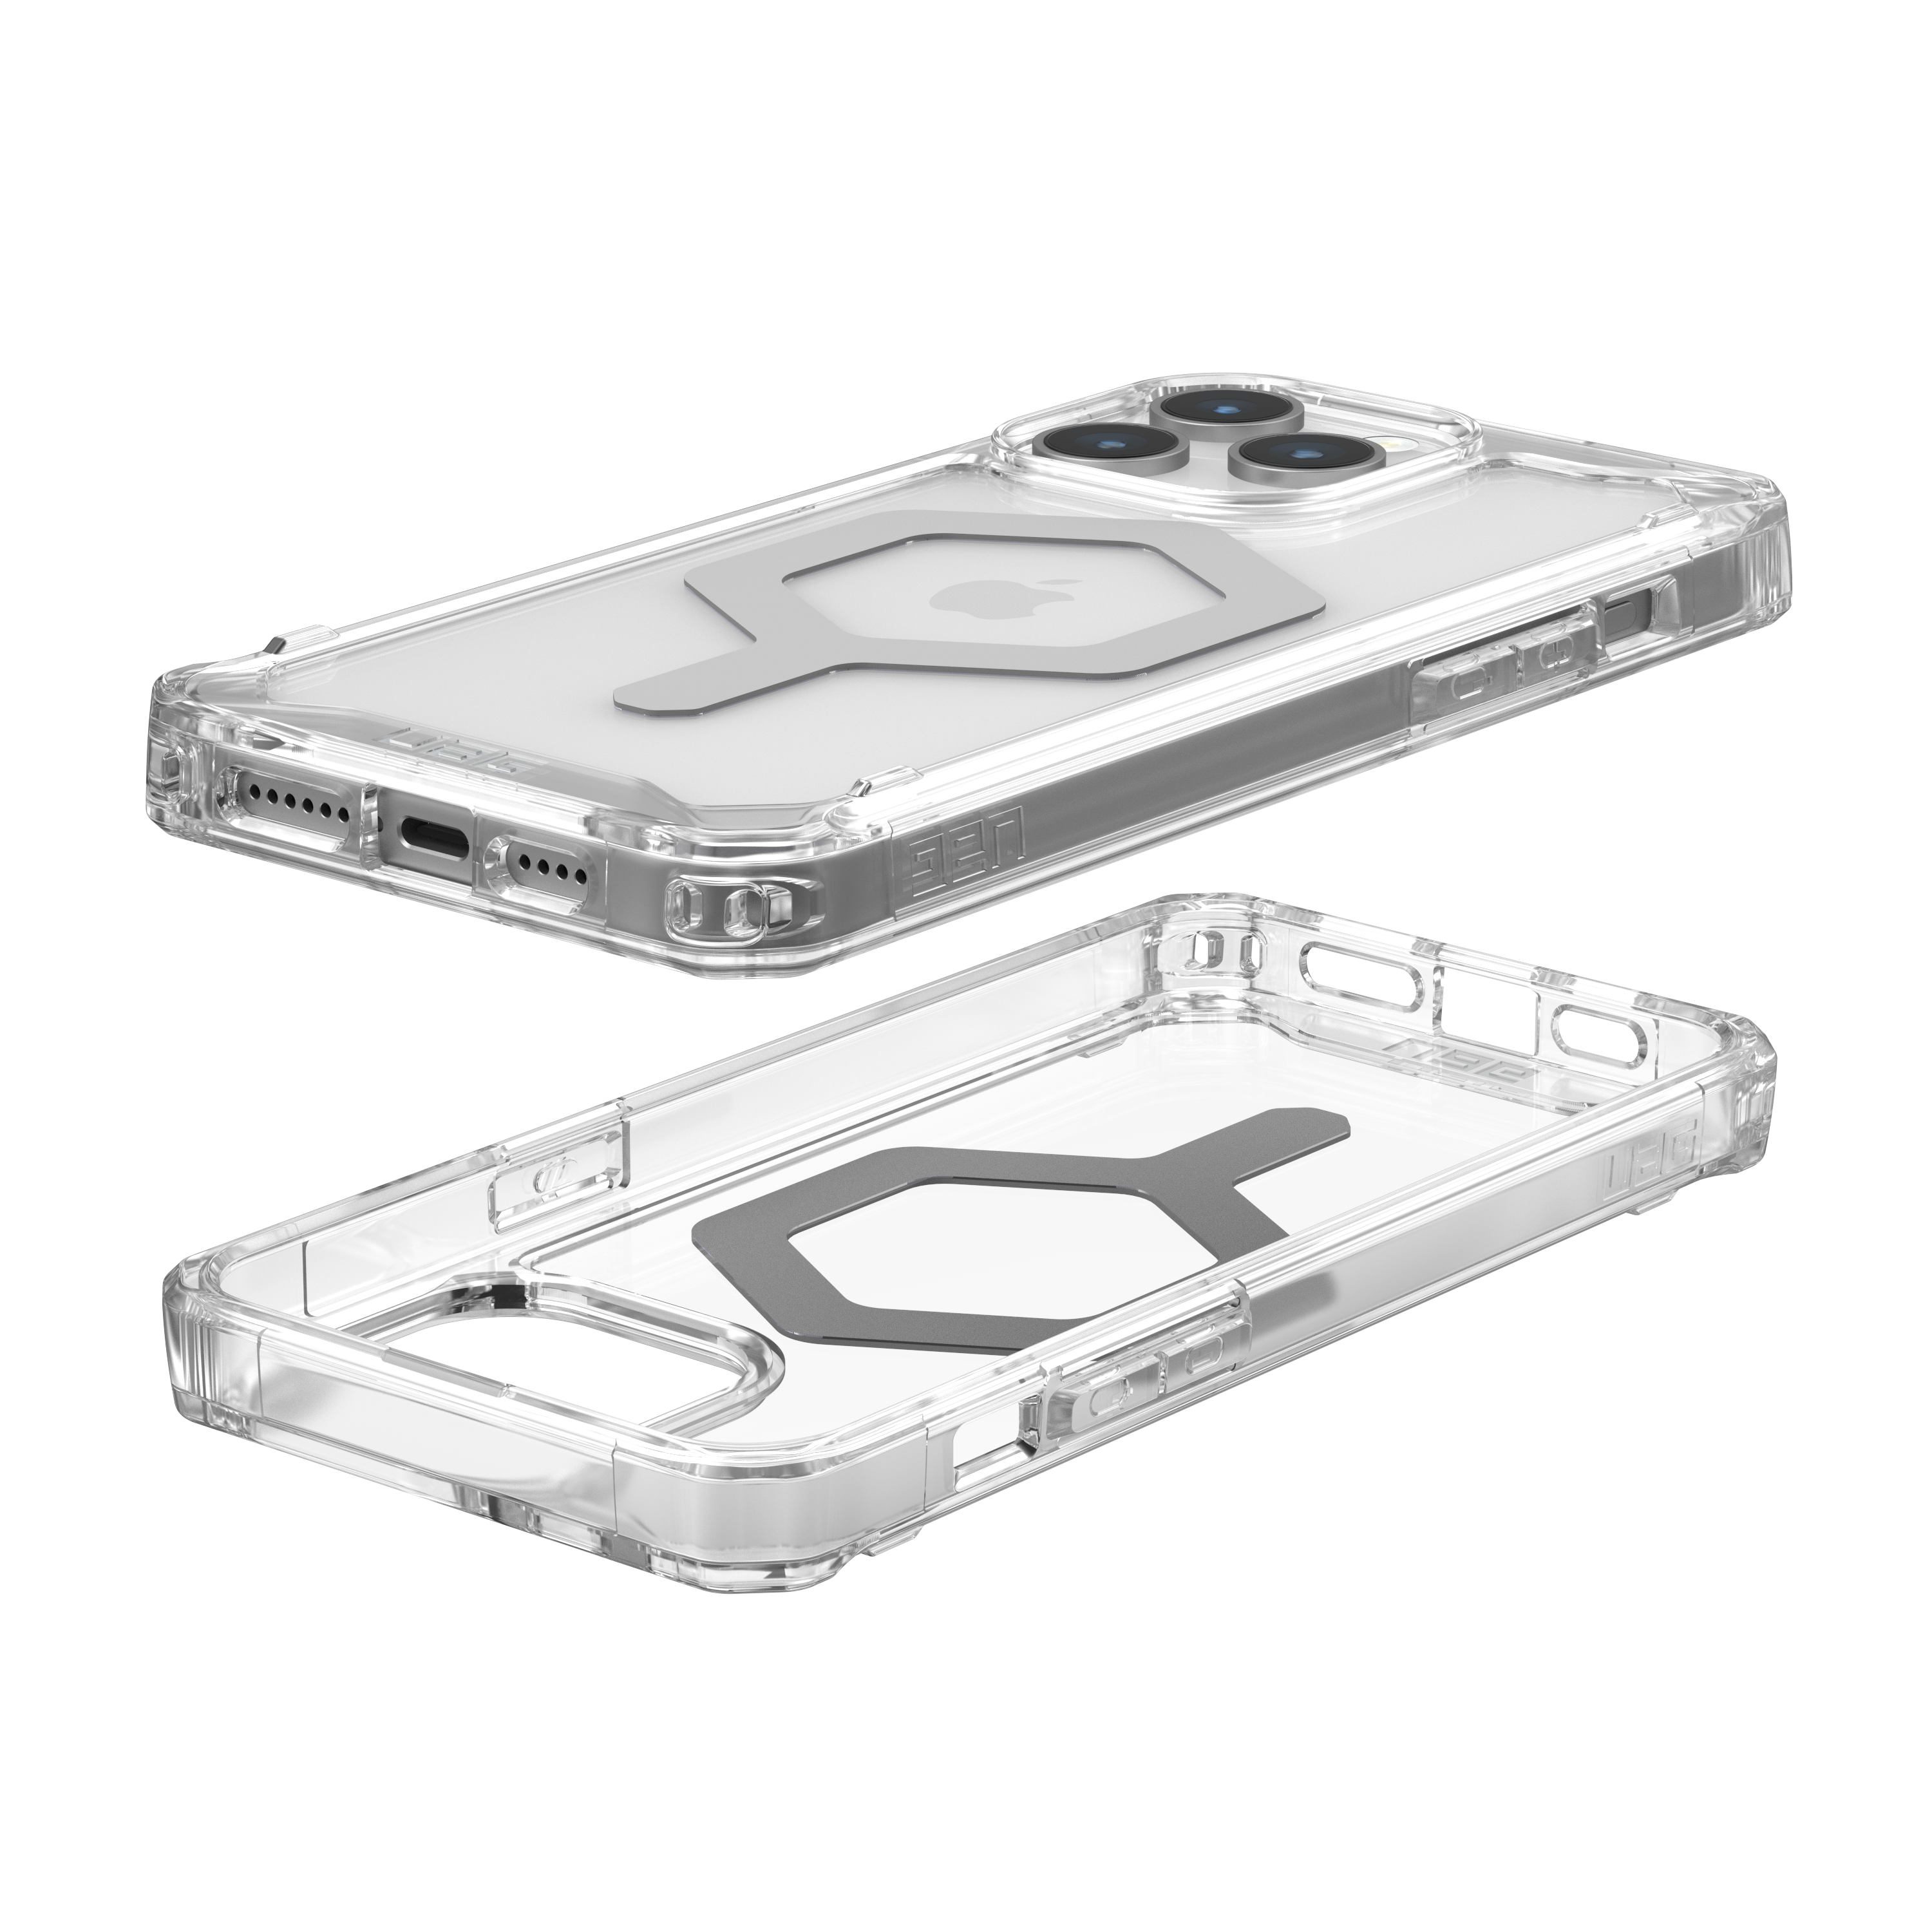 URBAN (transparent)/silber ice Pro MagSafe, GEAR iPhone Apple, Backcover, Plyo 15 Max, ARMOR